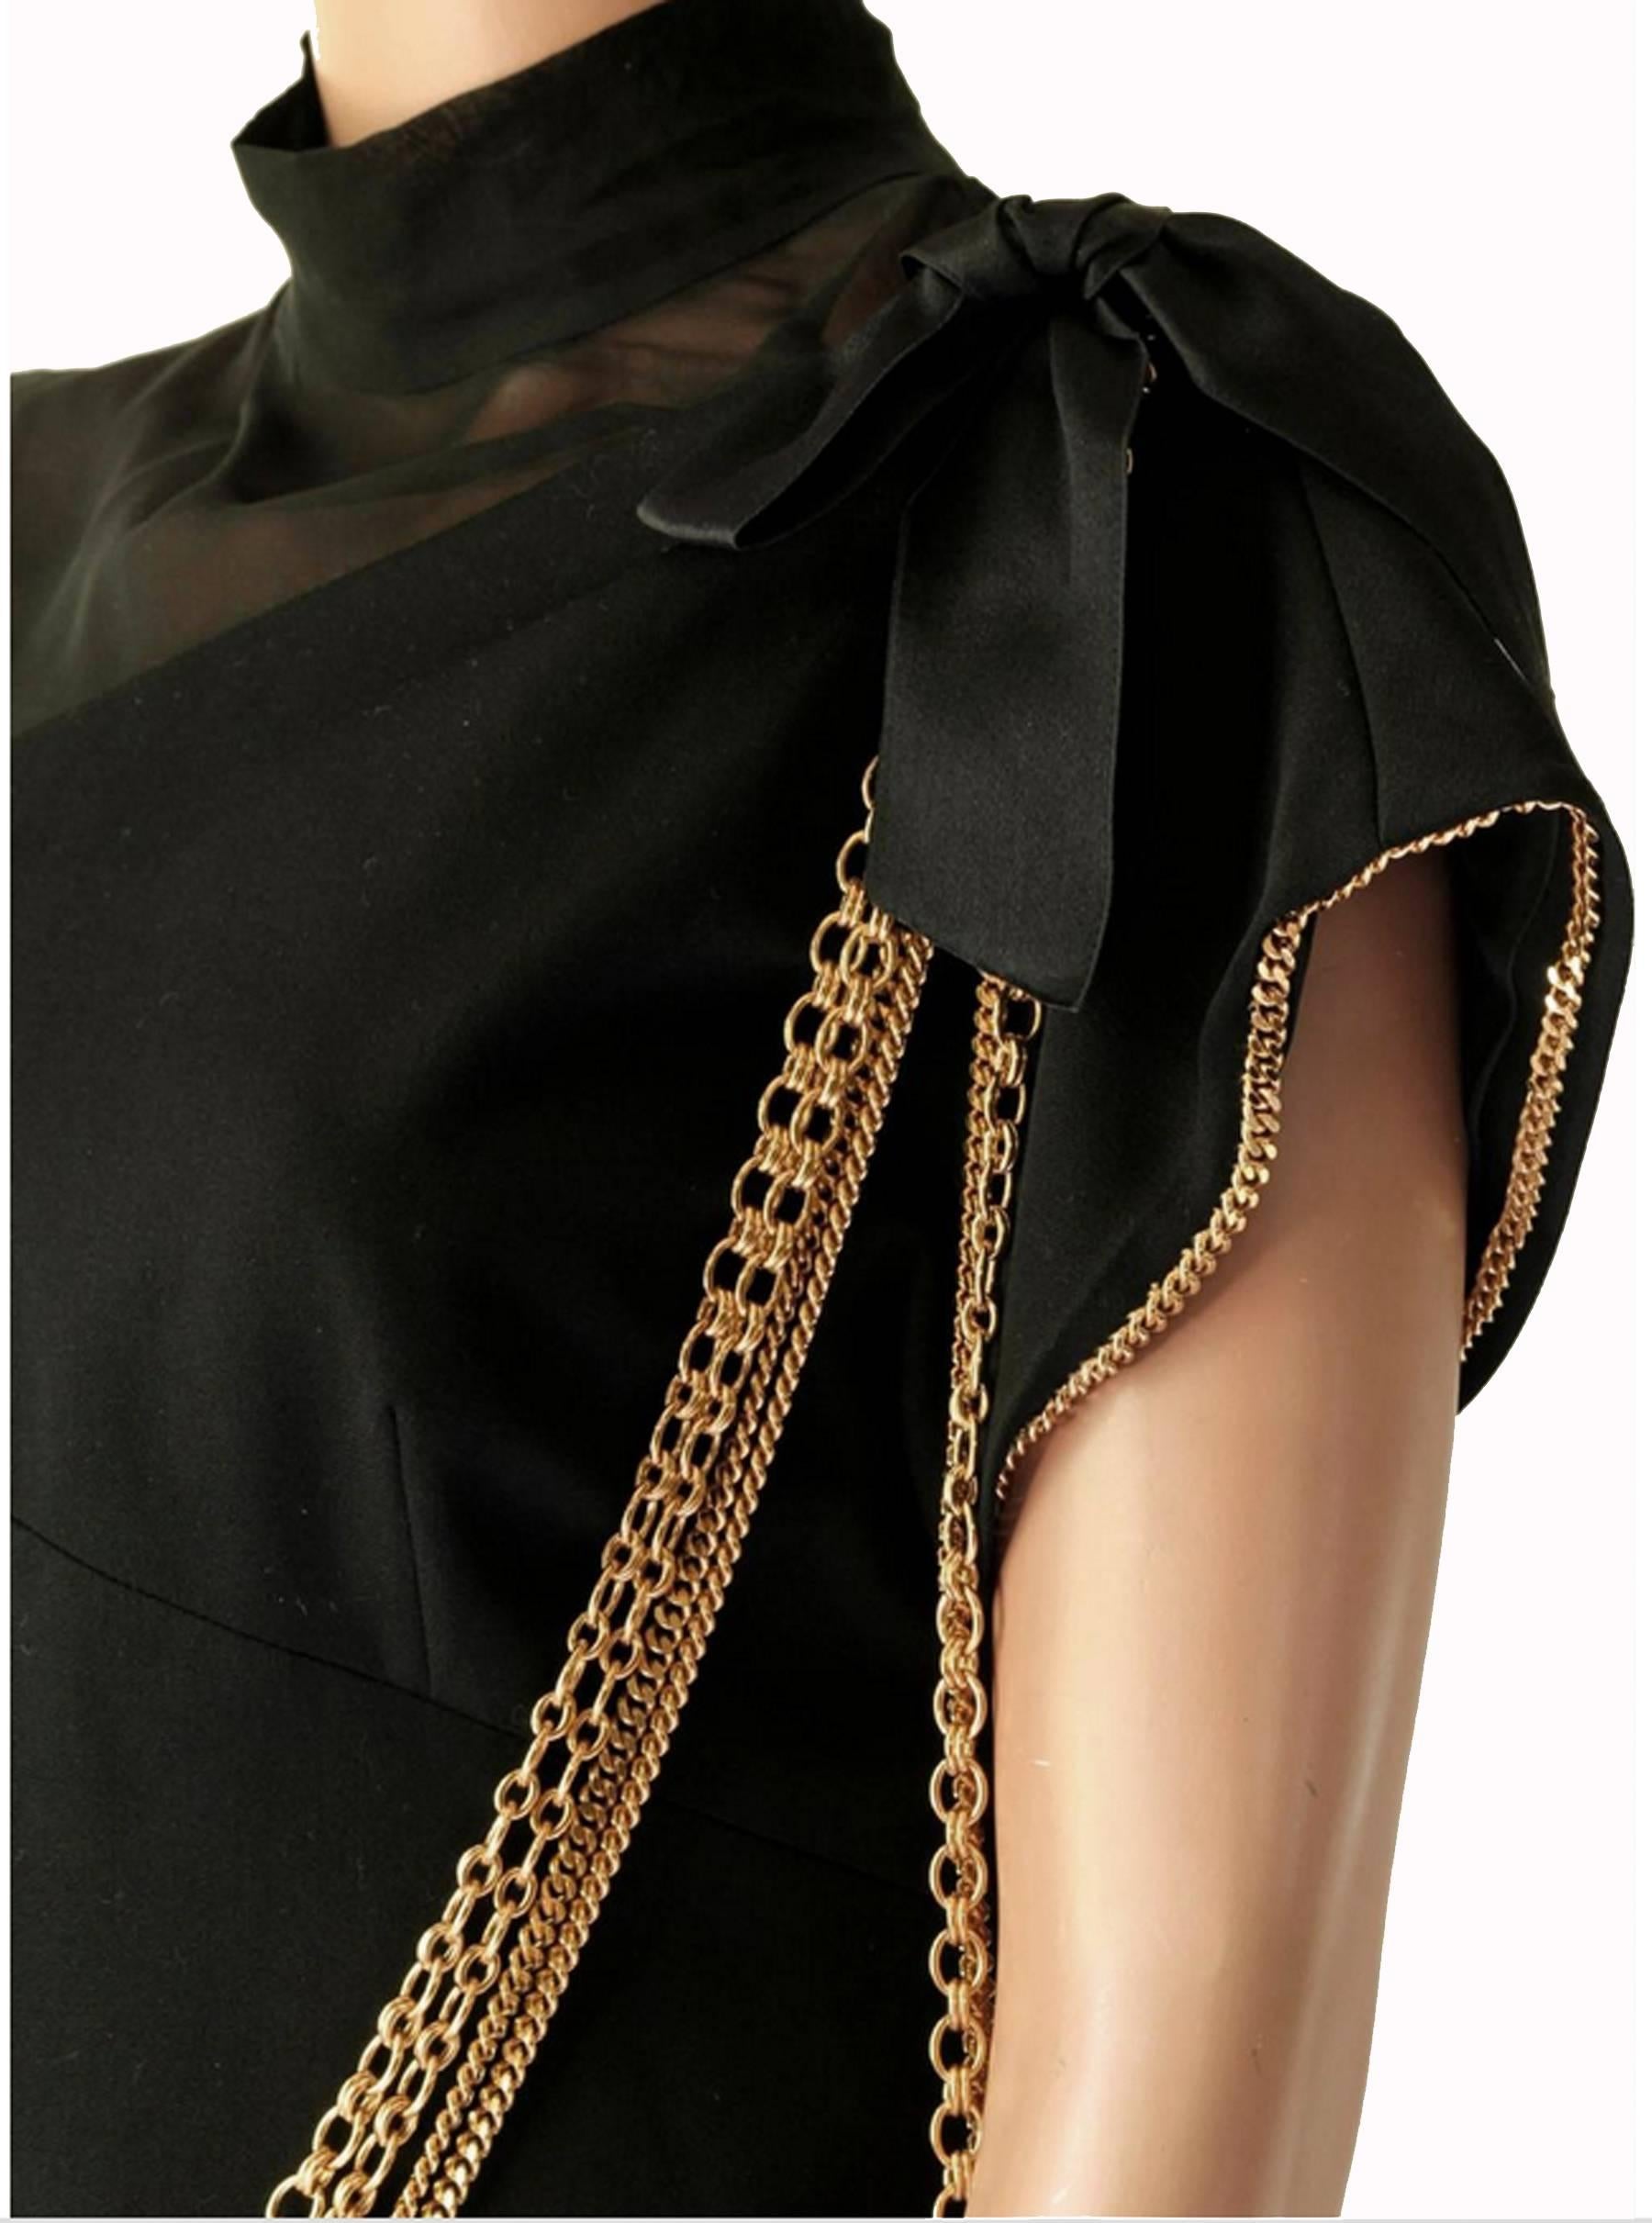 Women's Chanel Black Cocktail Dress Sheer Silk Panel with Gold Chains, 1980s